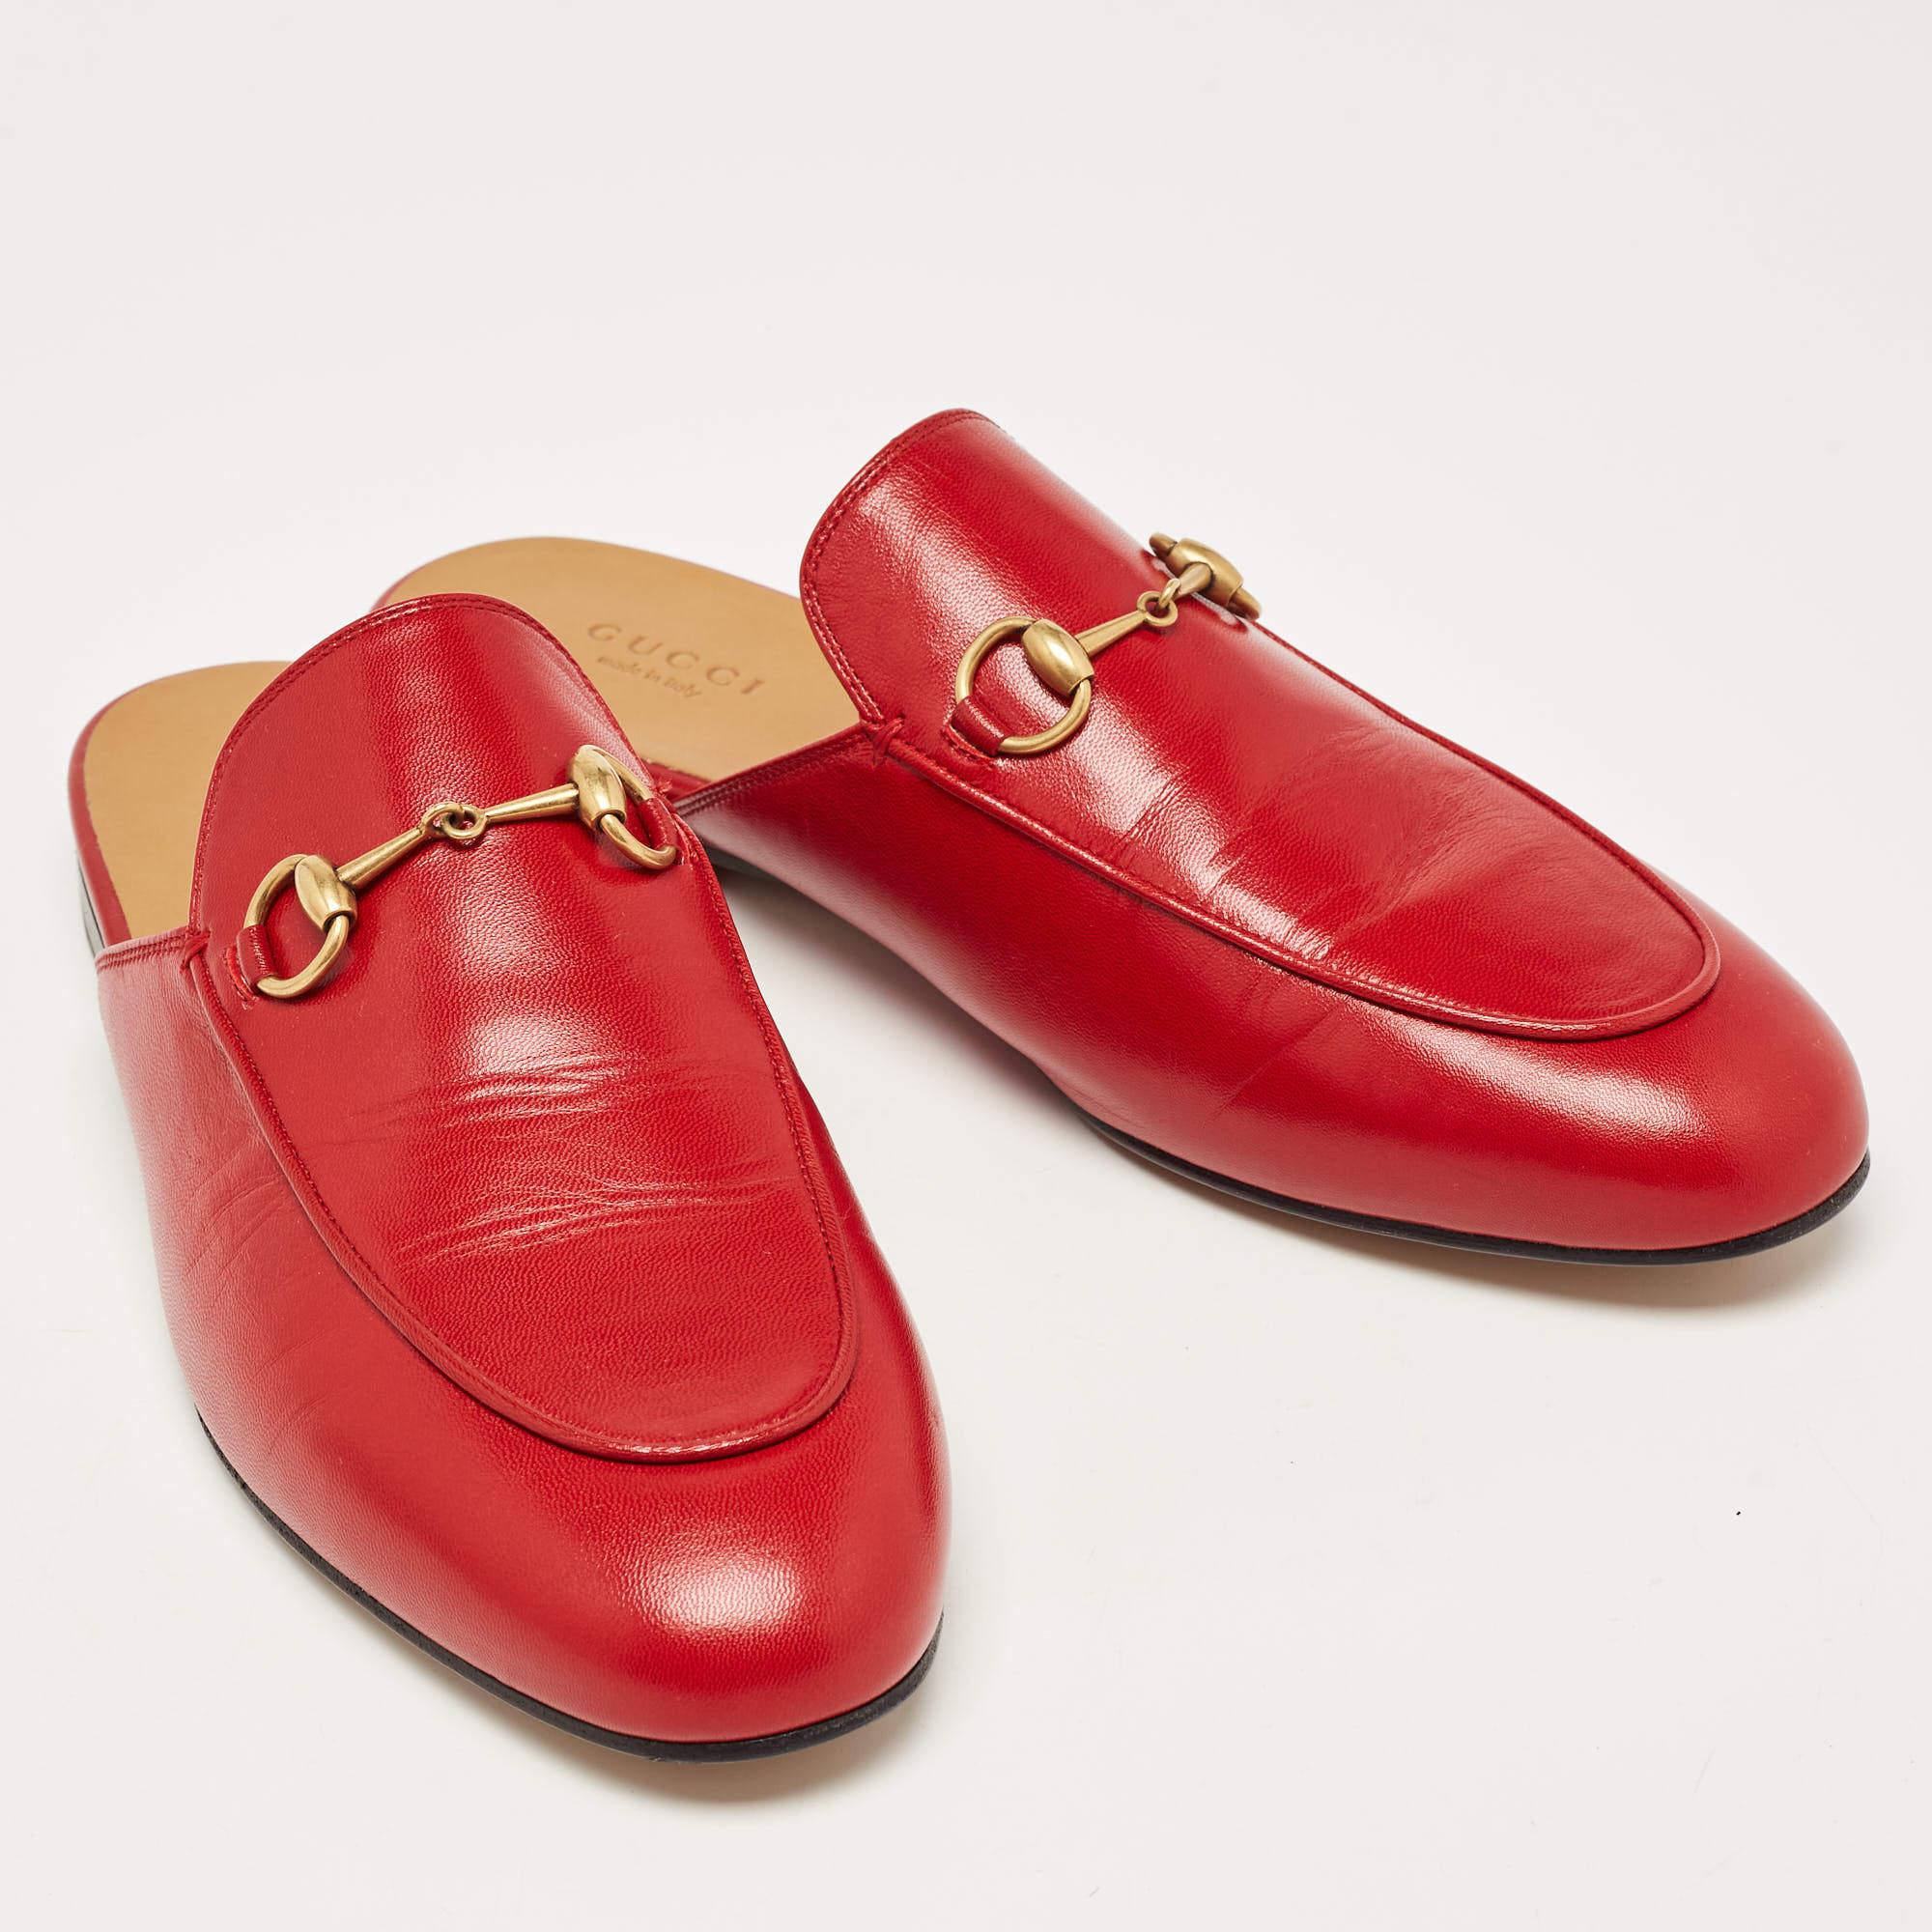 Gucci Red Leather Princetown Flat Mules Size 38.5 1